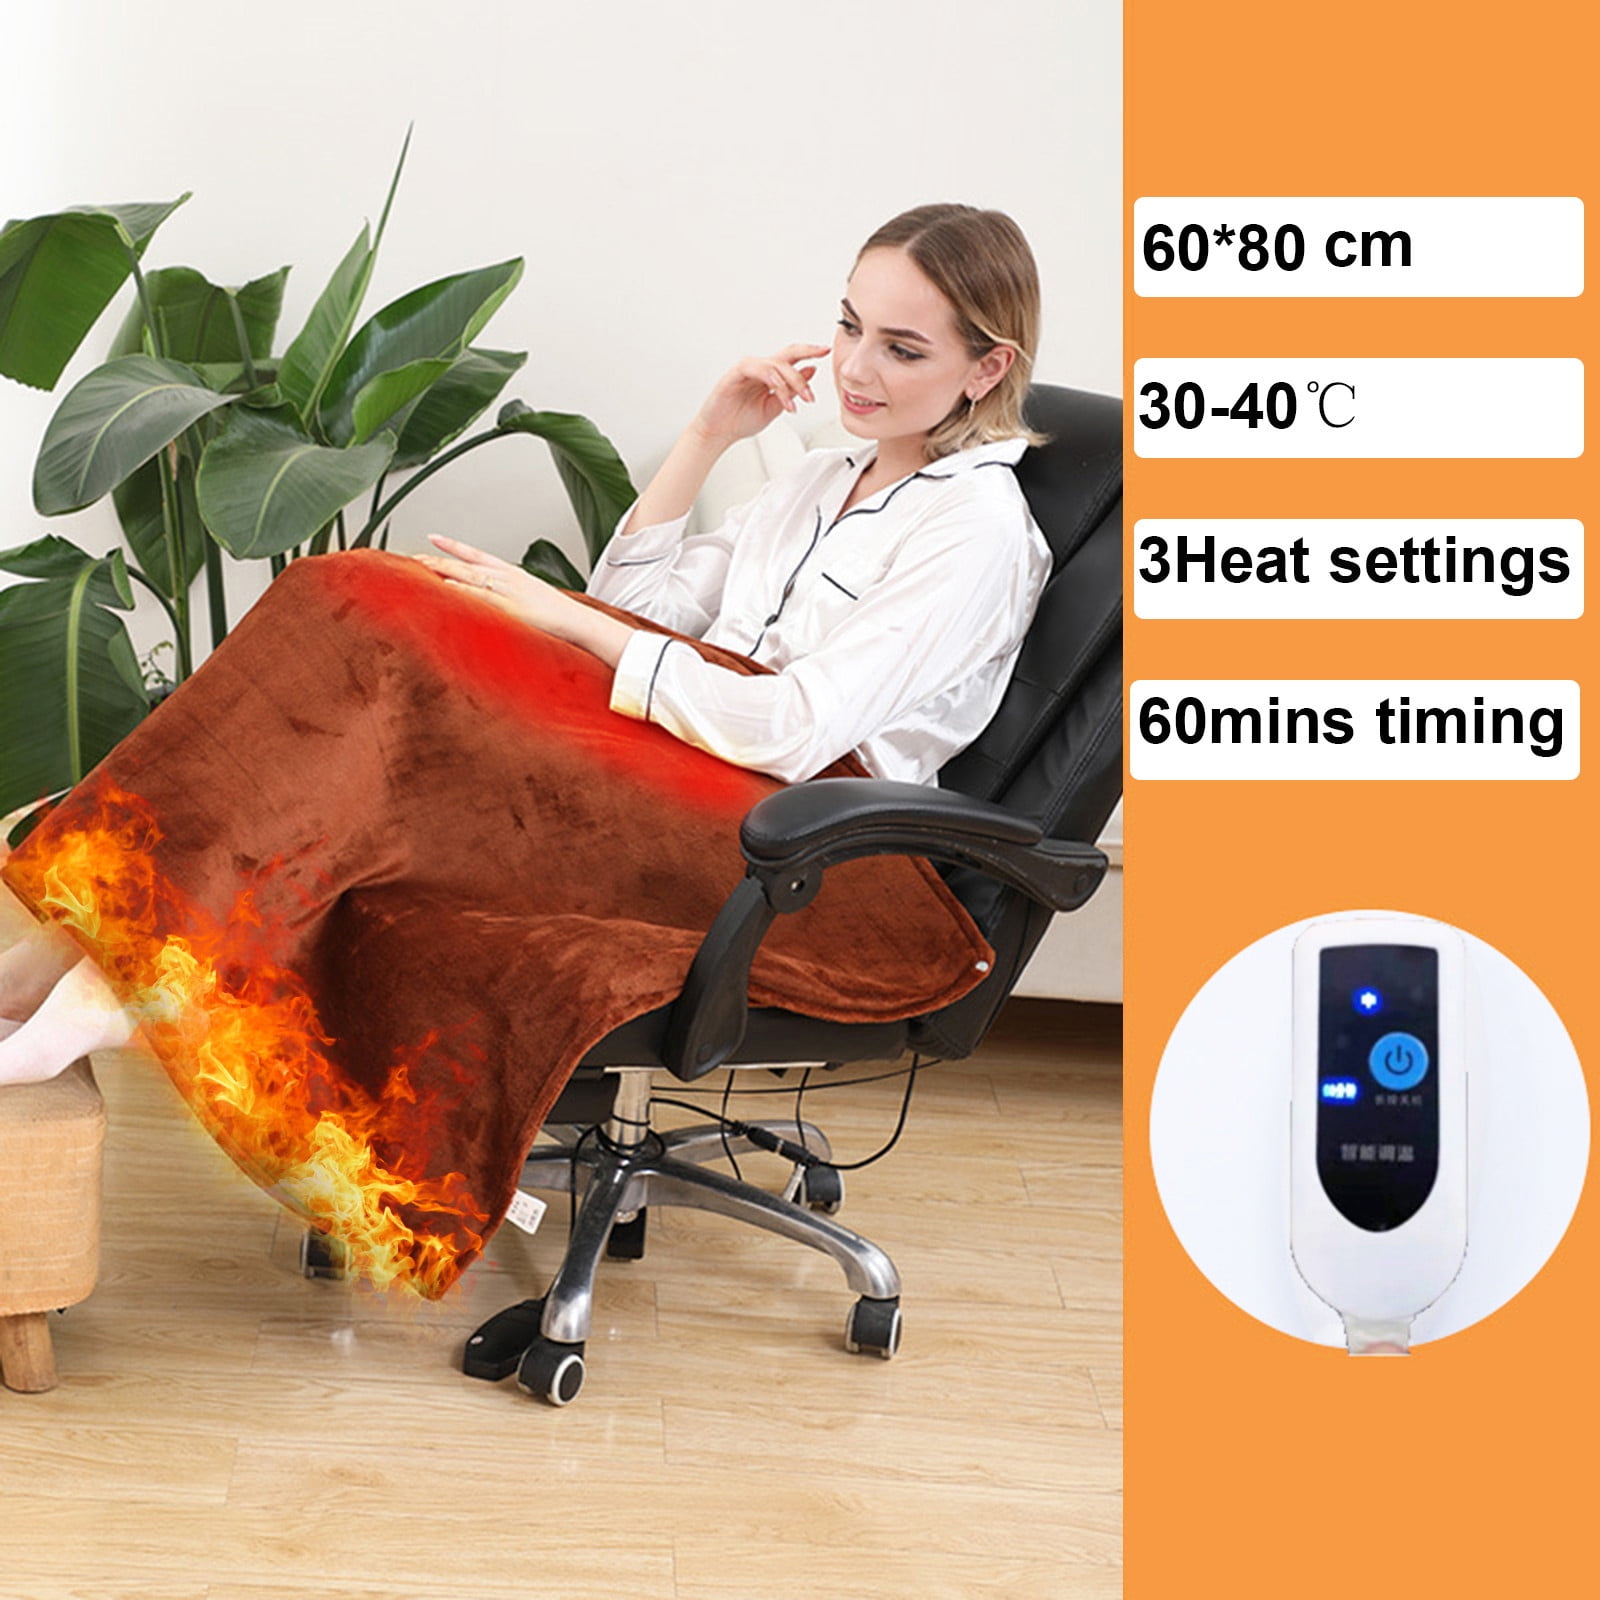 Details about   NEW Heated Blanket Electric Throws with Double-Layer Flannel Fast Heat 60X80CM 